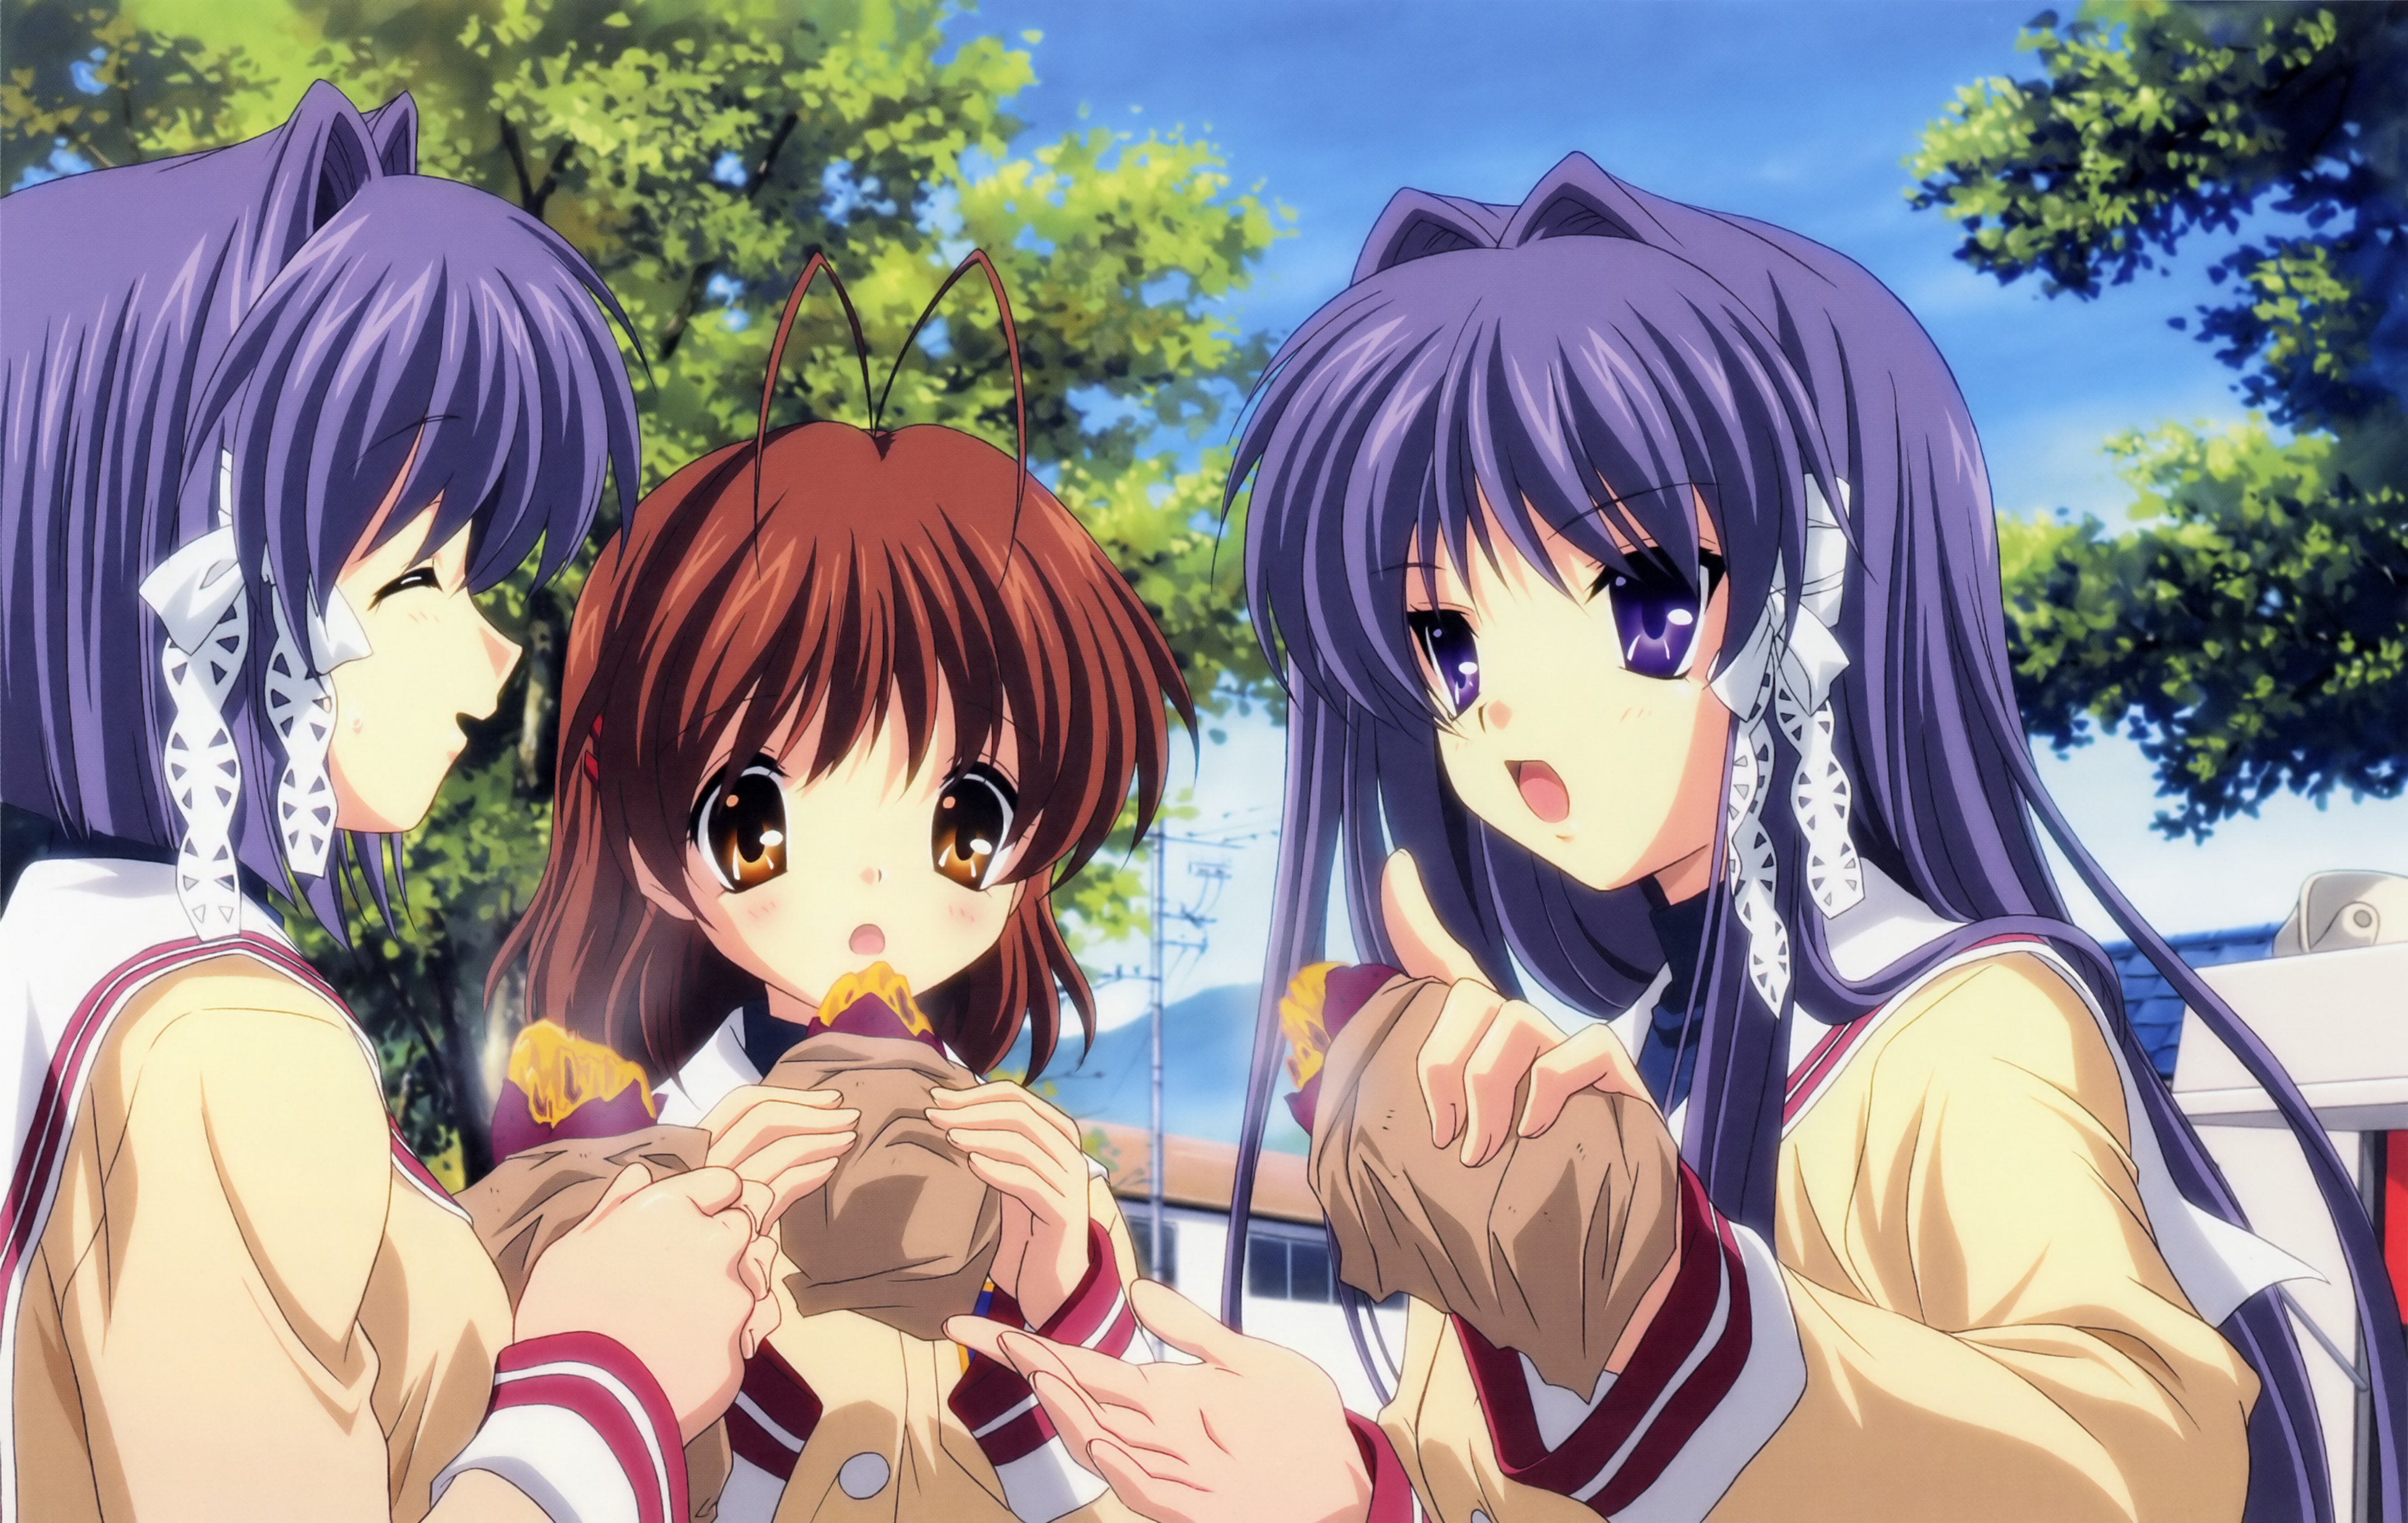 Four characters from the anime Clannad: Nagisa, Kyou, and Ryou, standing together.